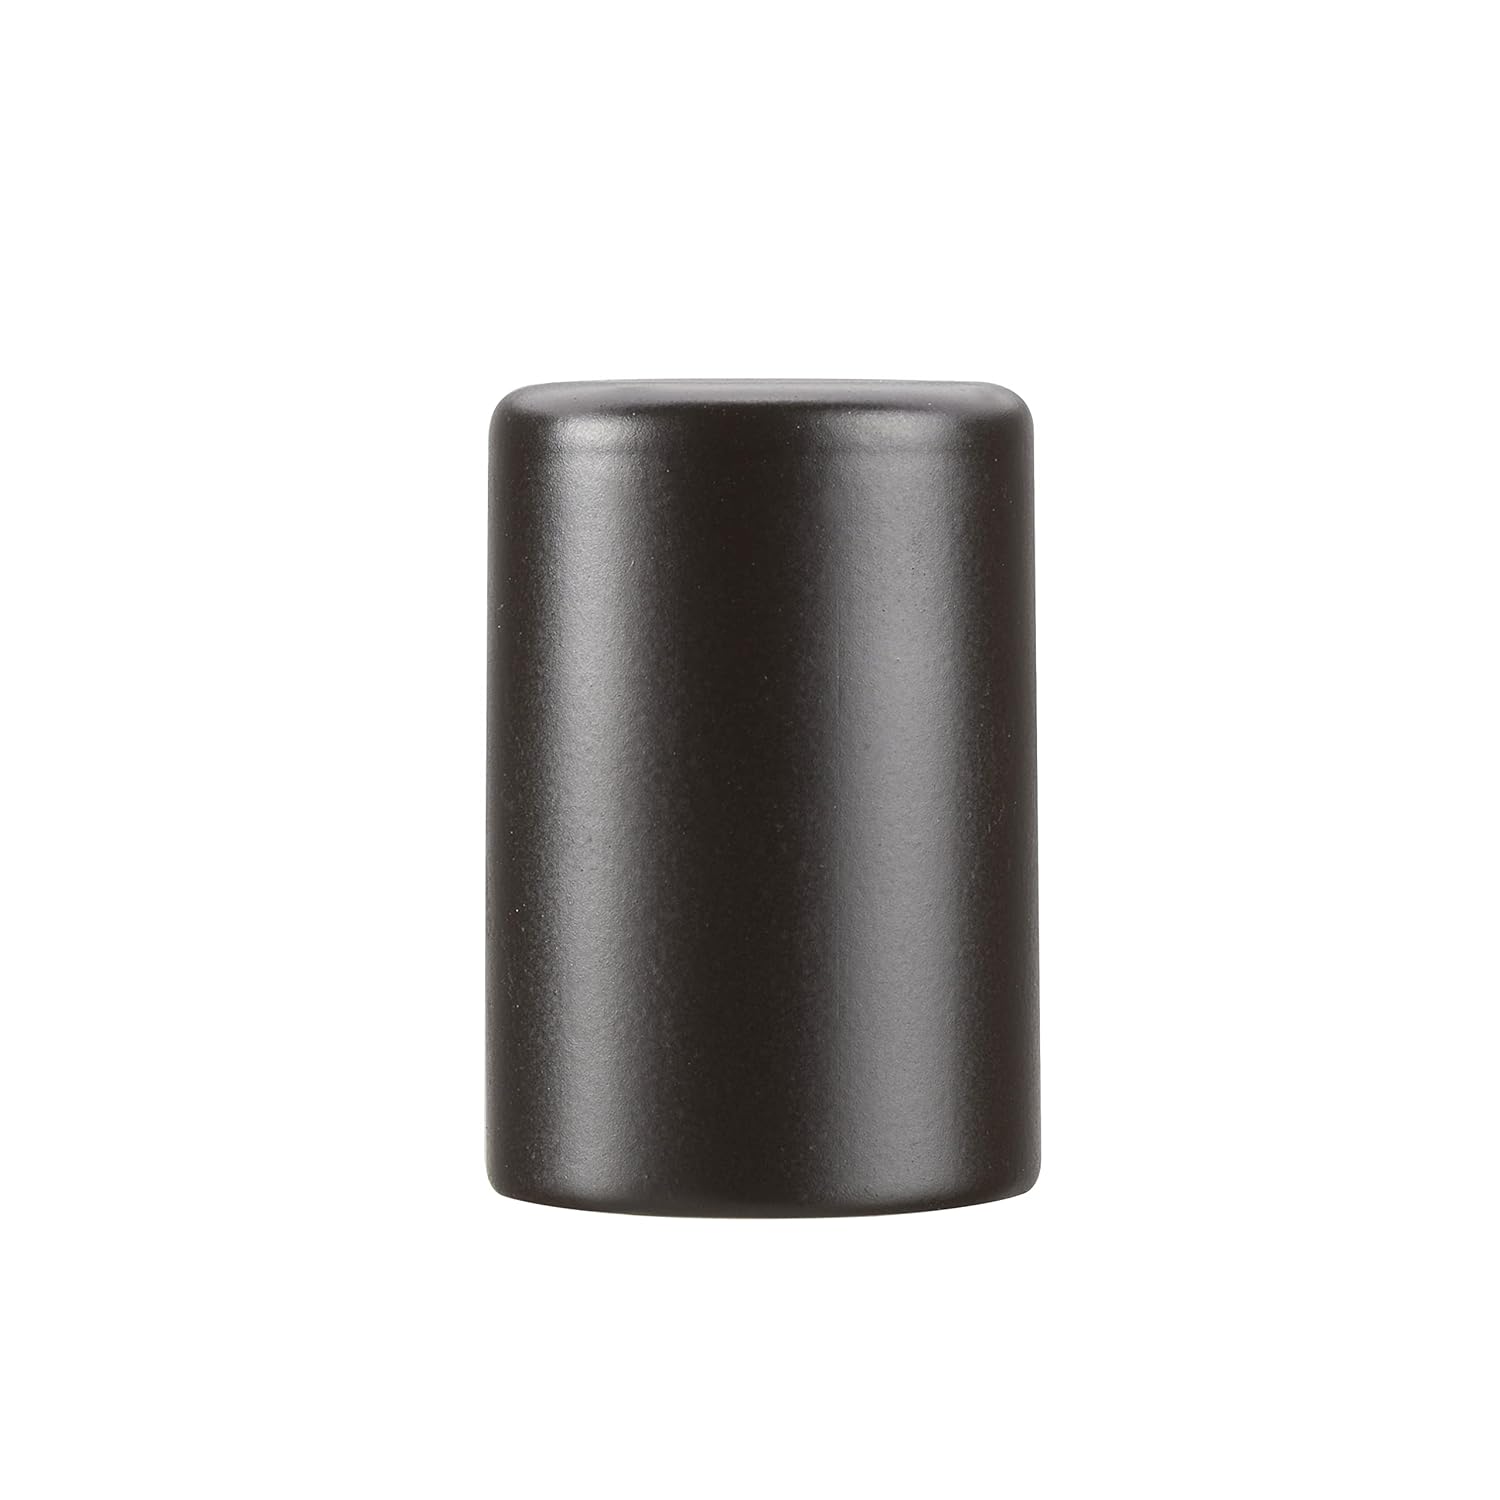 Great Choice Products Oil Rubbed Bronze 24043-05-2, Finial For Lamp Shade Finish, 1-1/4" Height, 2Pcs/Pack